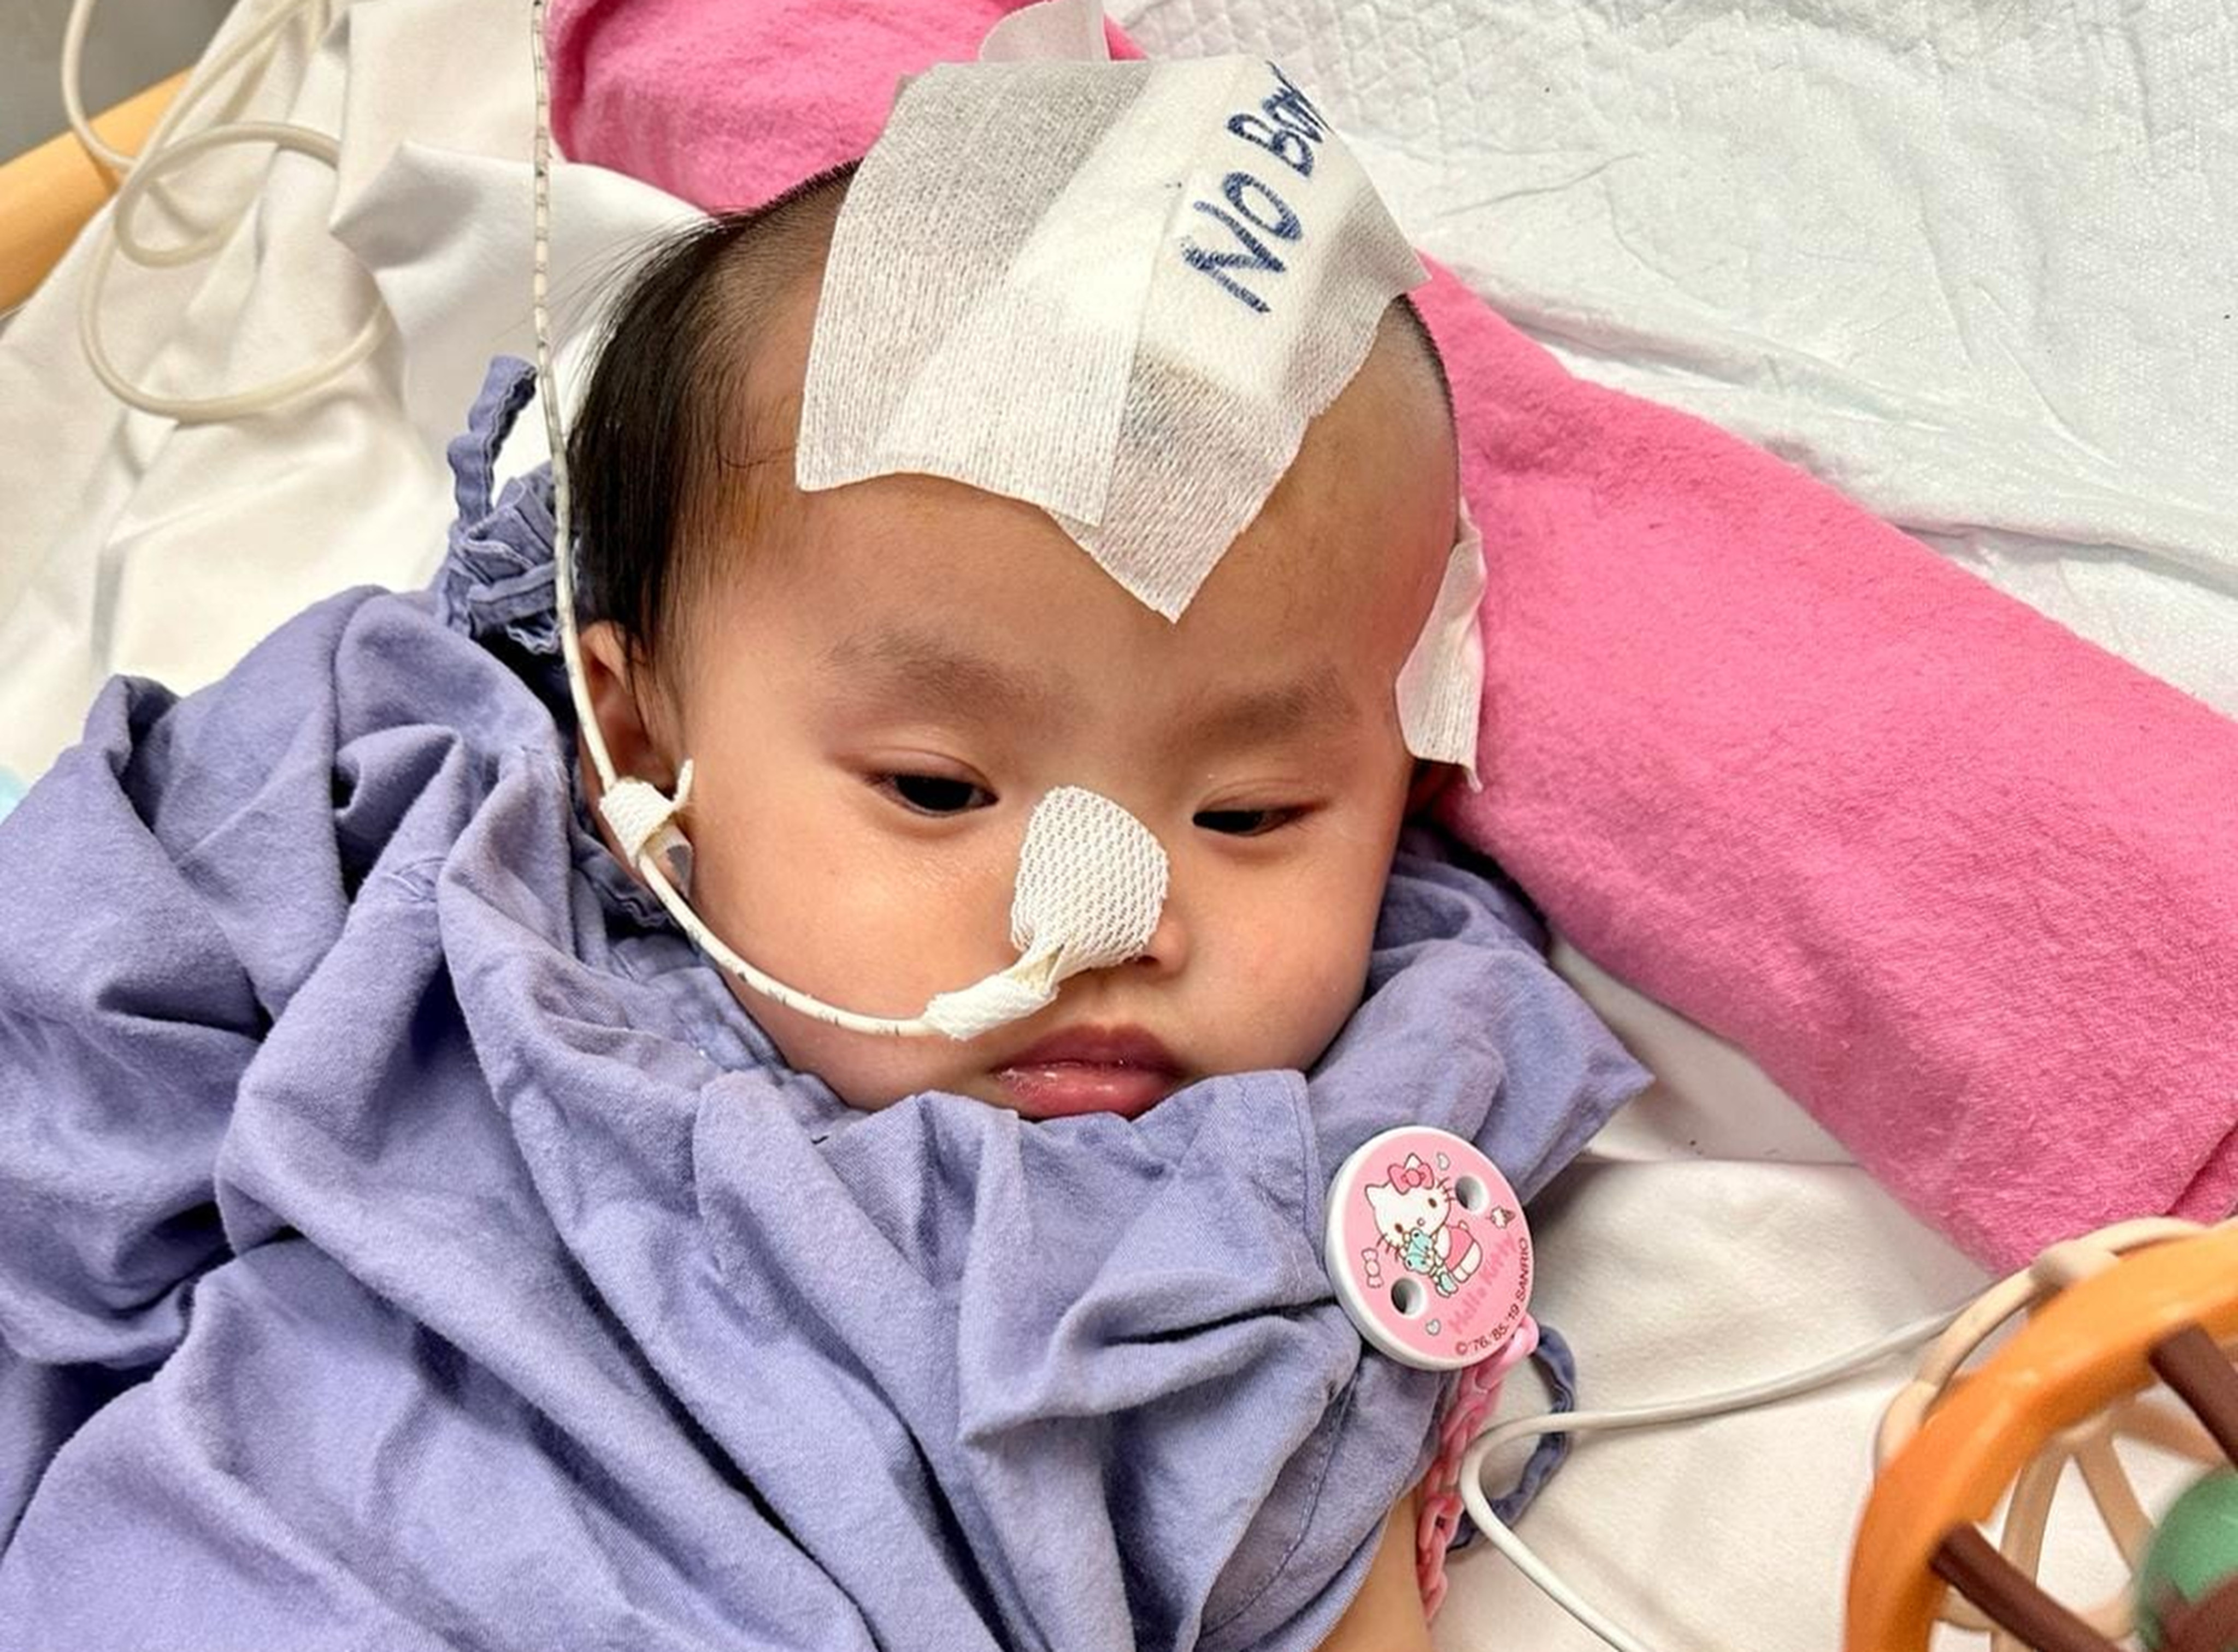 ‘Little Suet-yee’ in hospital. Her vision has also been impaired following major bleeding in her eyes from the injuries. Photo: Facebook/香港關懷力量